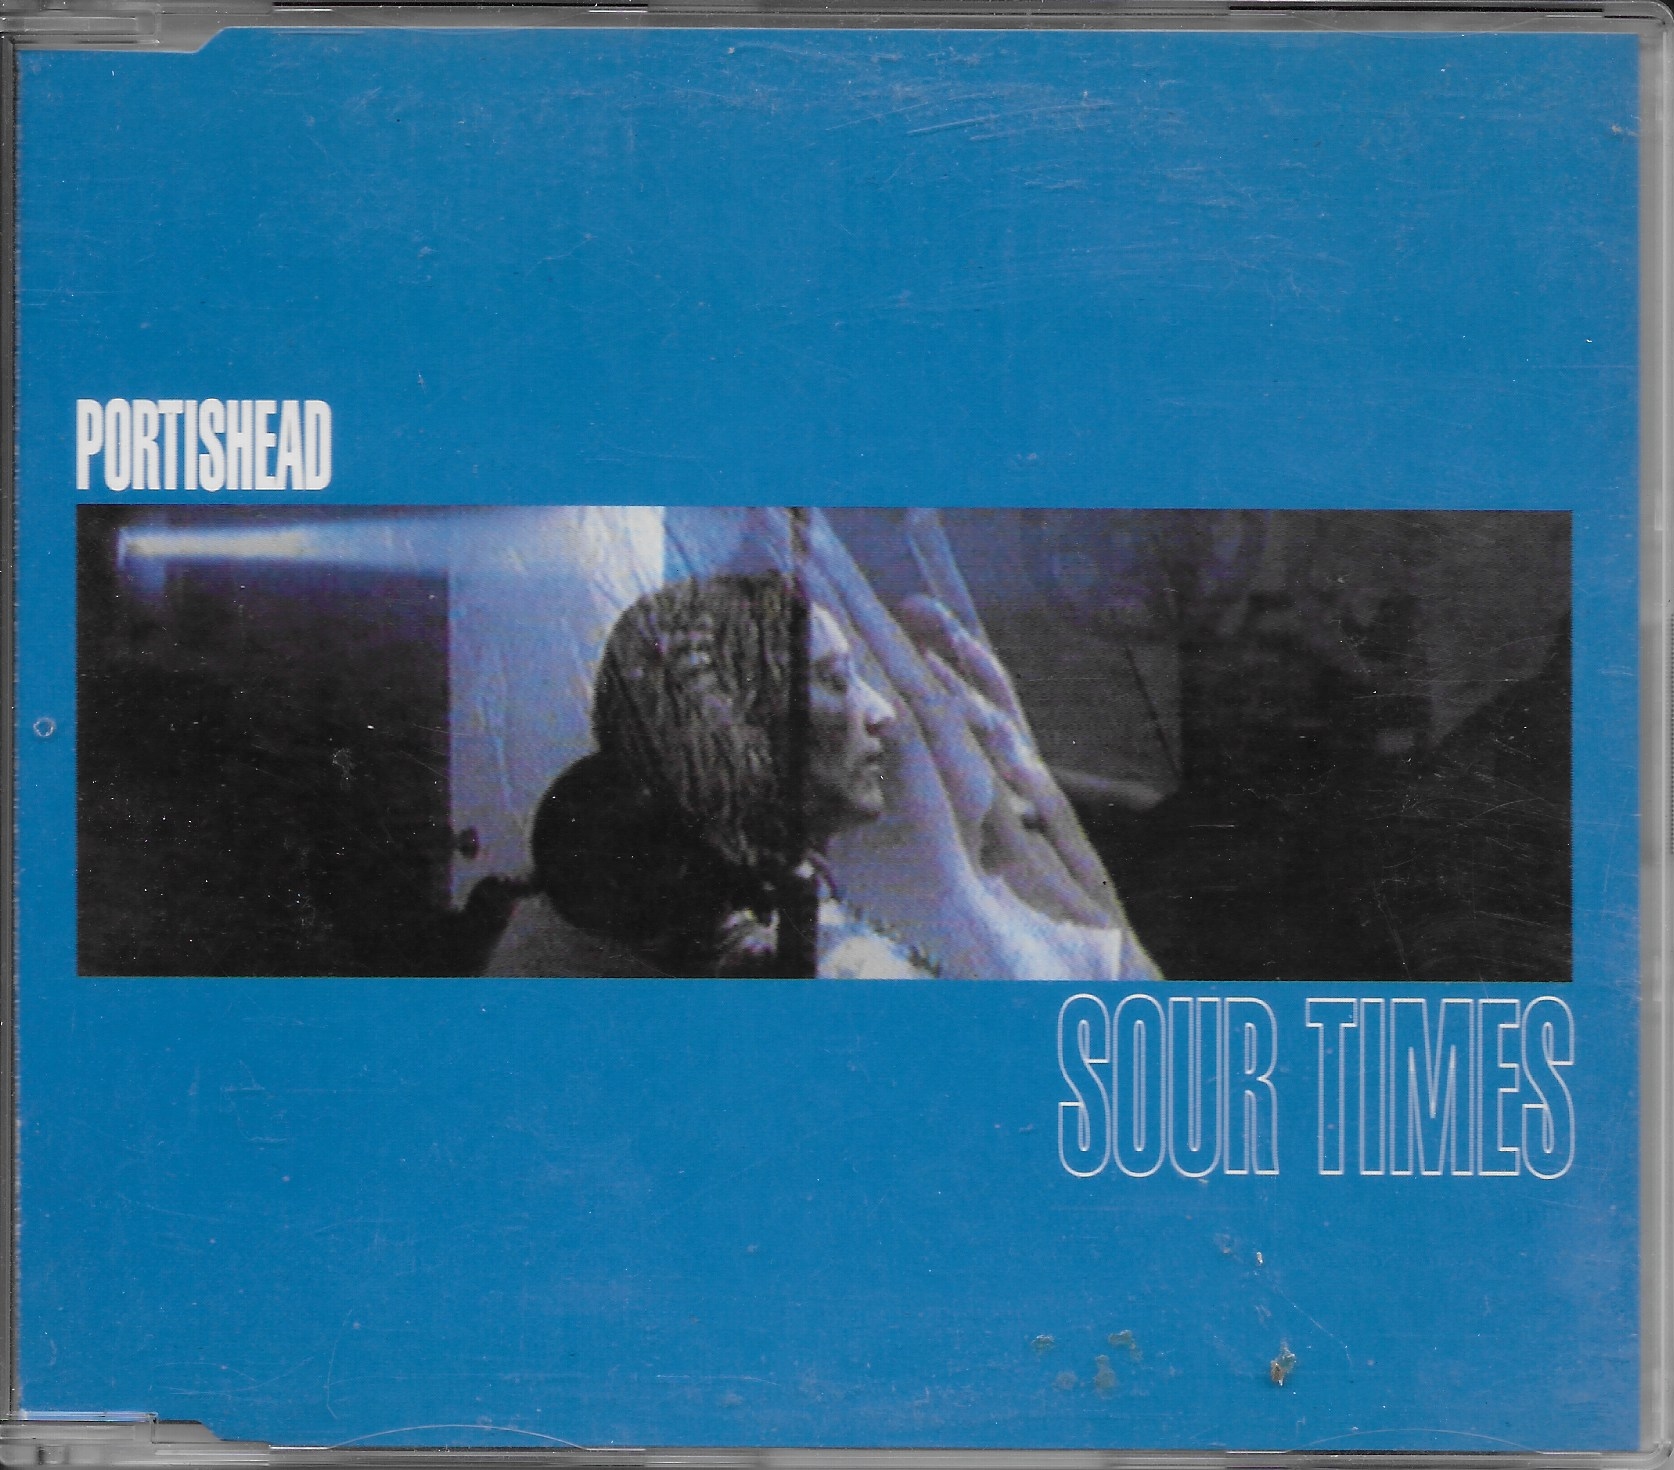 Picture of Sour times by artist Portishead 